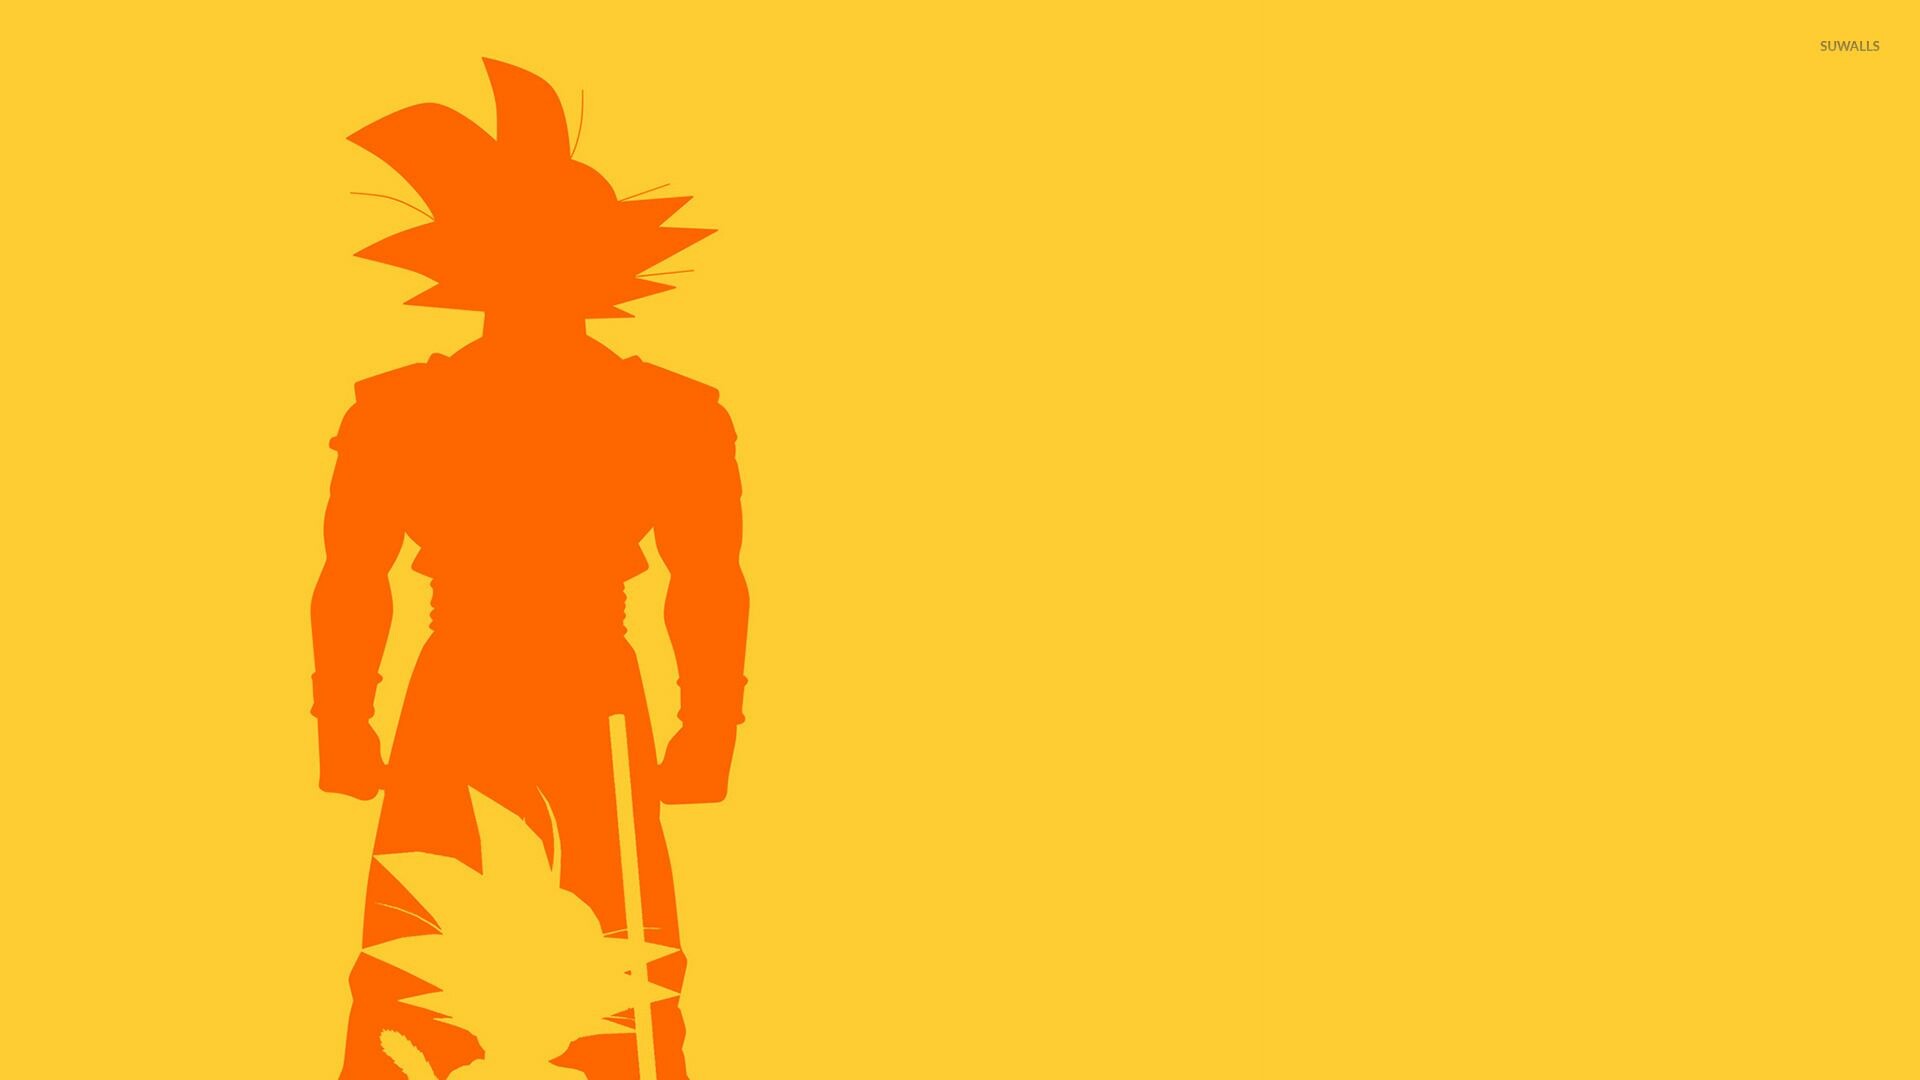 56 Dragon Ball Goku Wallpapers Hd 4k 5k For Pc And Mobile Download Free Images For Iphone Android